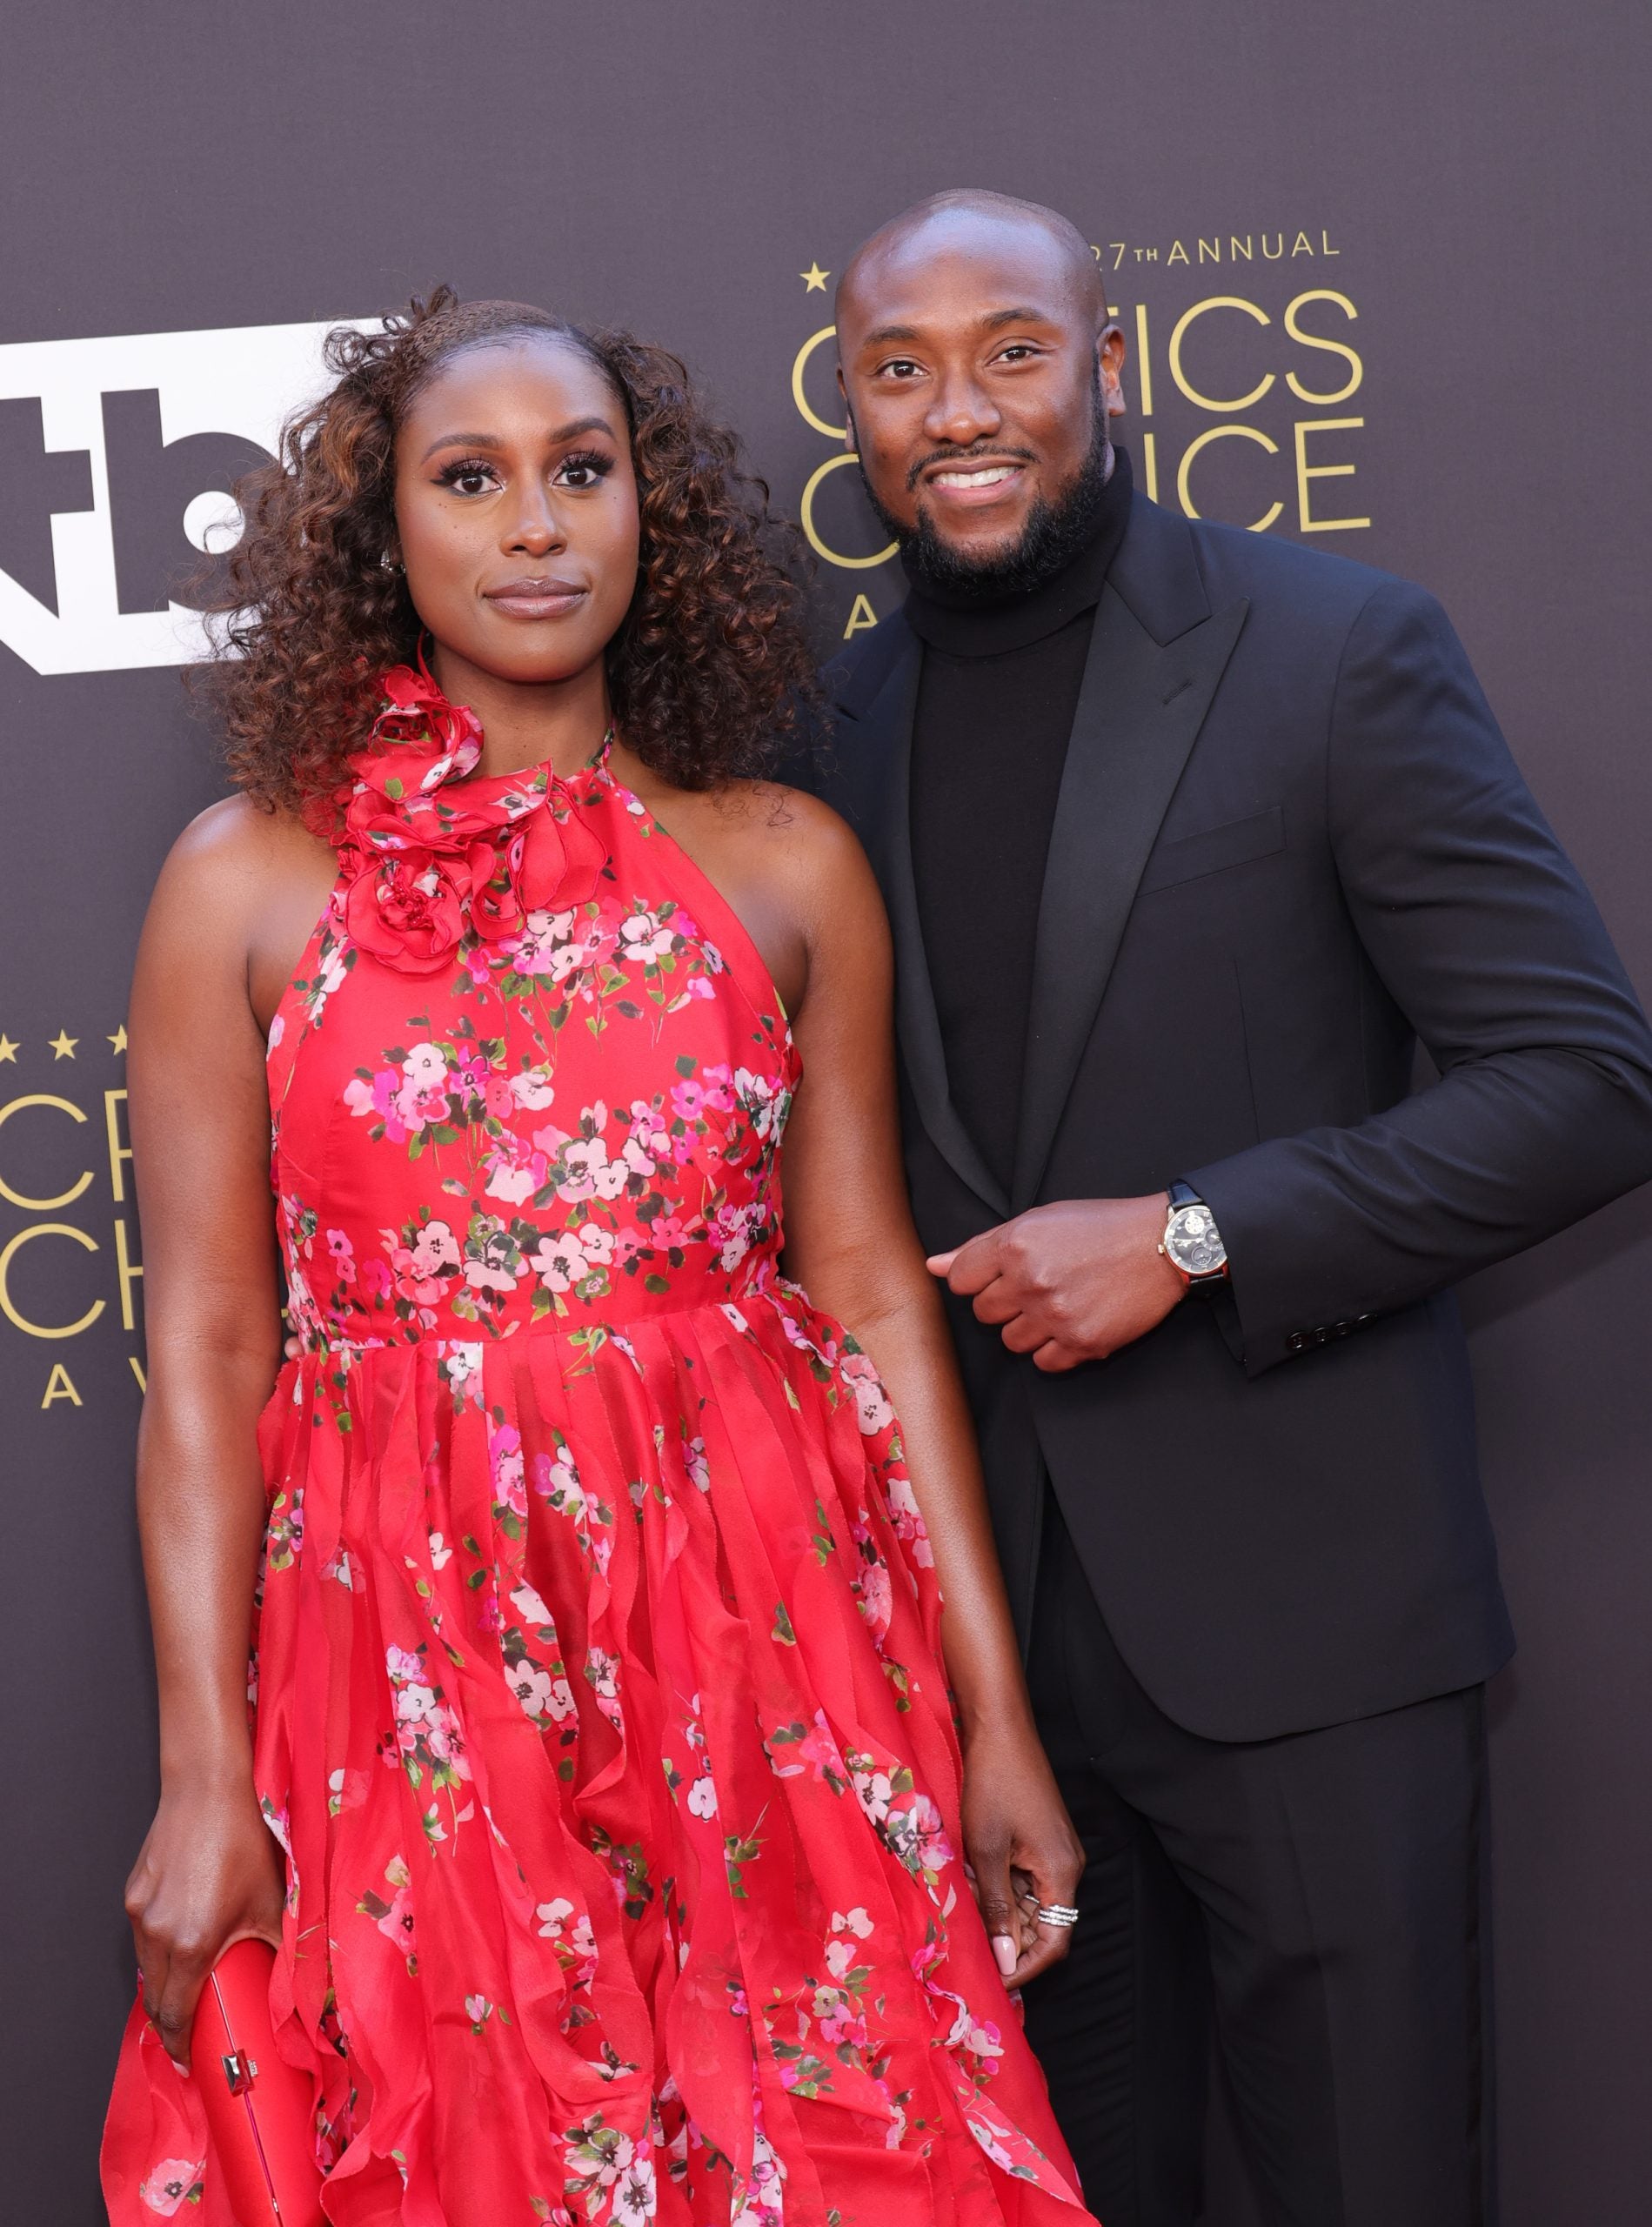 It Was Date Night For Taye Diggs And Apryl Jones And These Cute Couples At The 2022 Critics Choice Awards